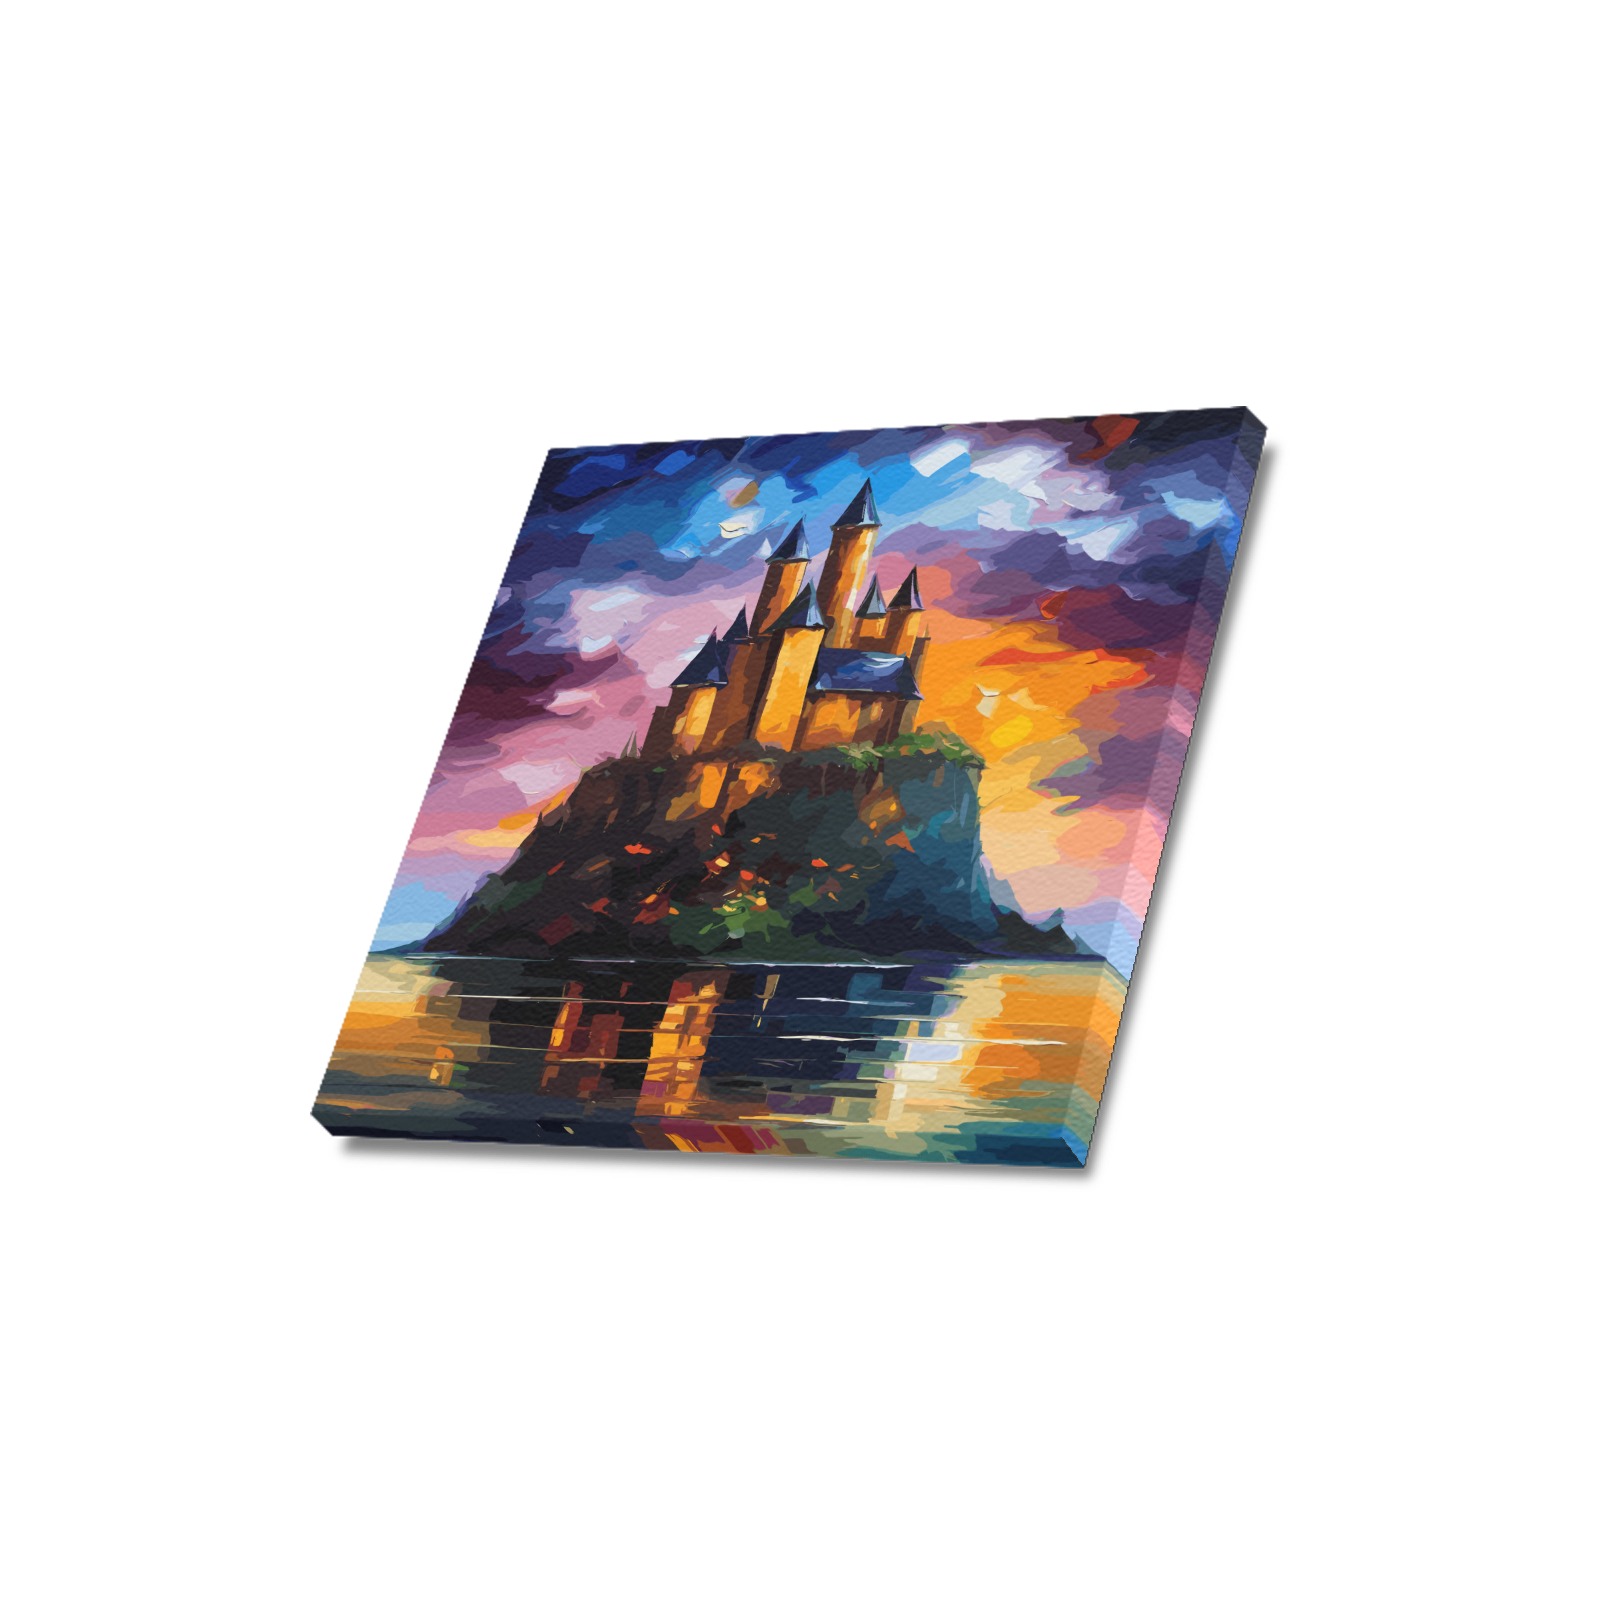 Medieval castle on a small island at sunset art. Upgraded Canvas Print 16"x16"